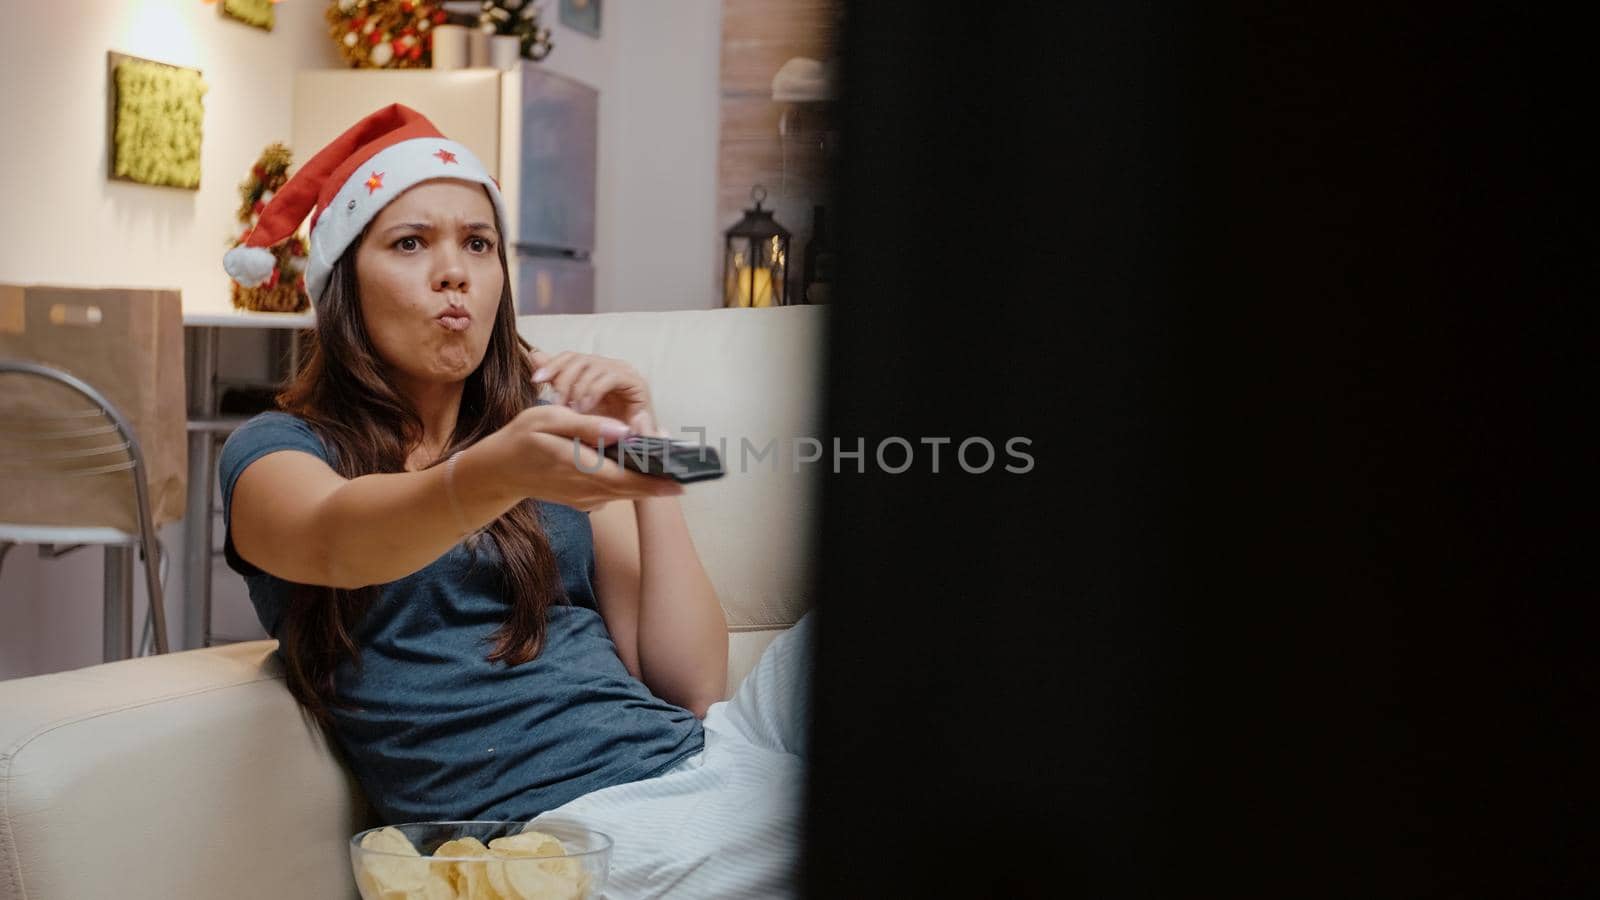 Frustrated person switching channels on TV using remote control, feeling angry on christmas eve holiday. Woman with santa hat and decorated room looking at movie on television with chips